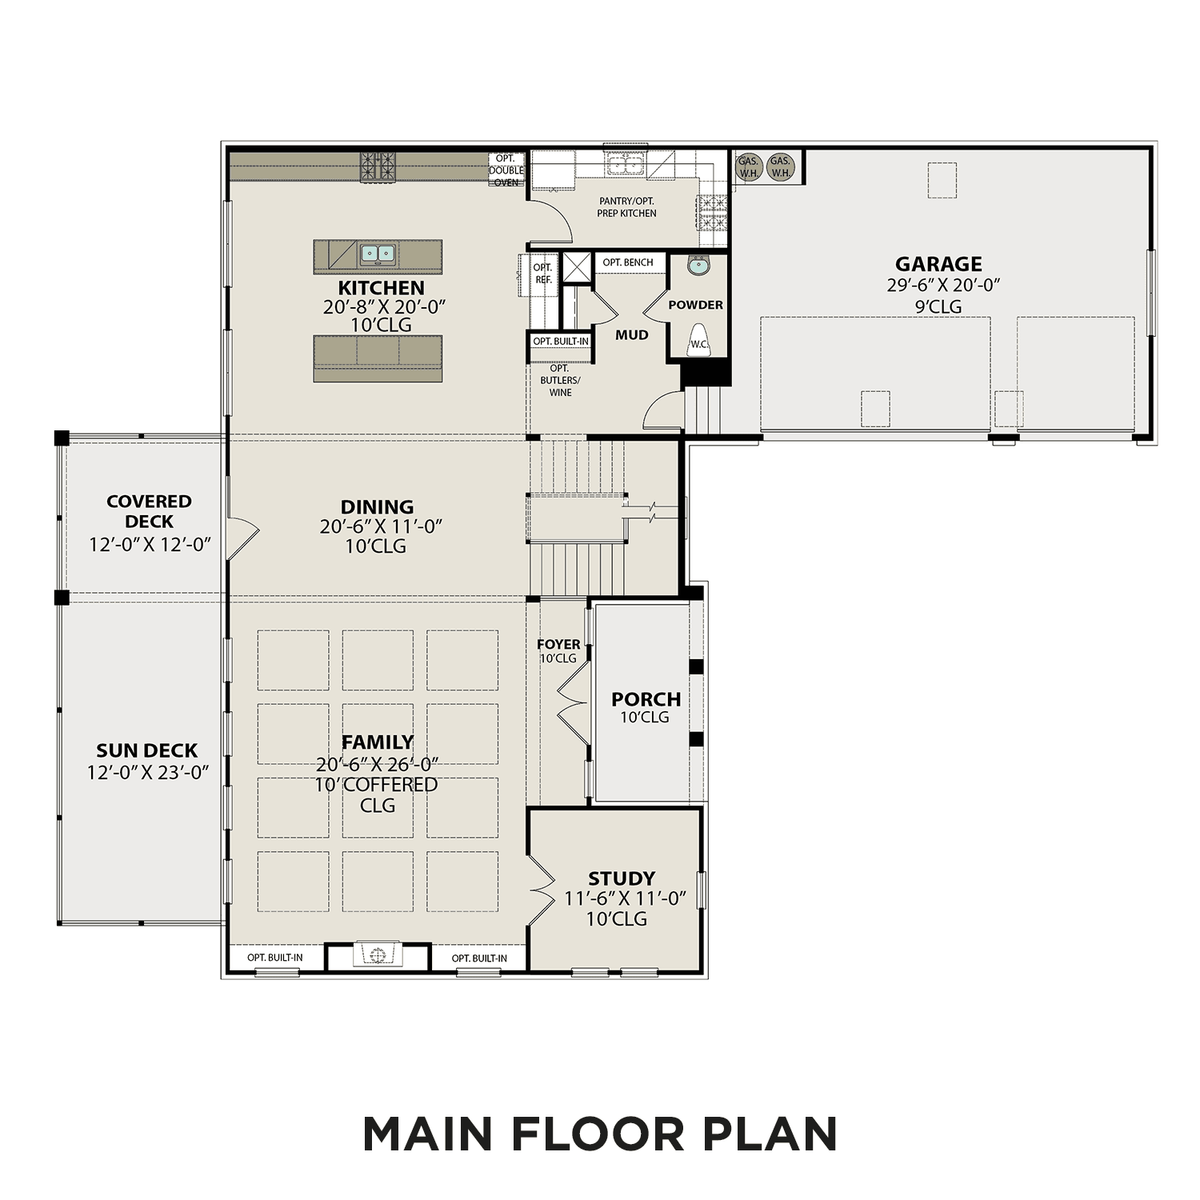 1 - The Alston A floor plan layout for 5410 Maroon Drive in Davidson Homes' Shelton Square community.